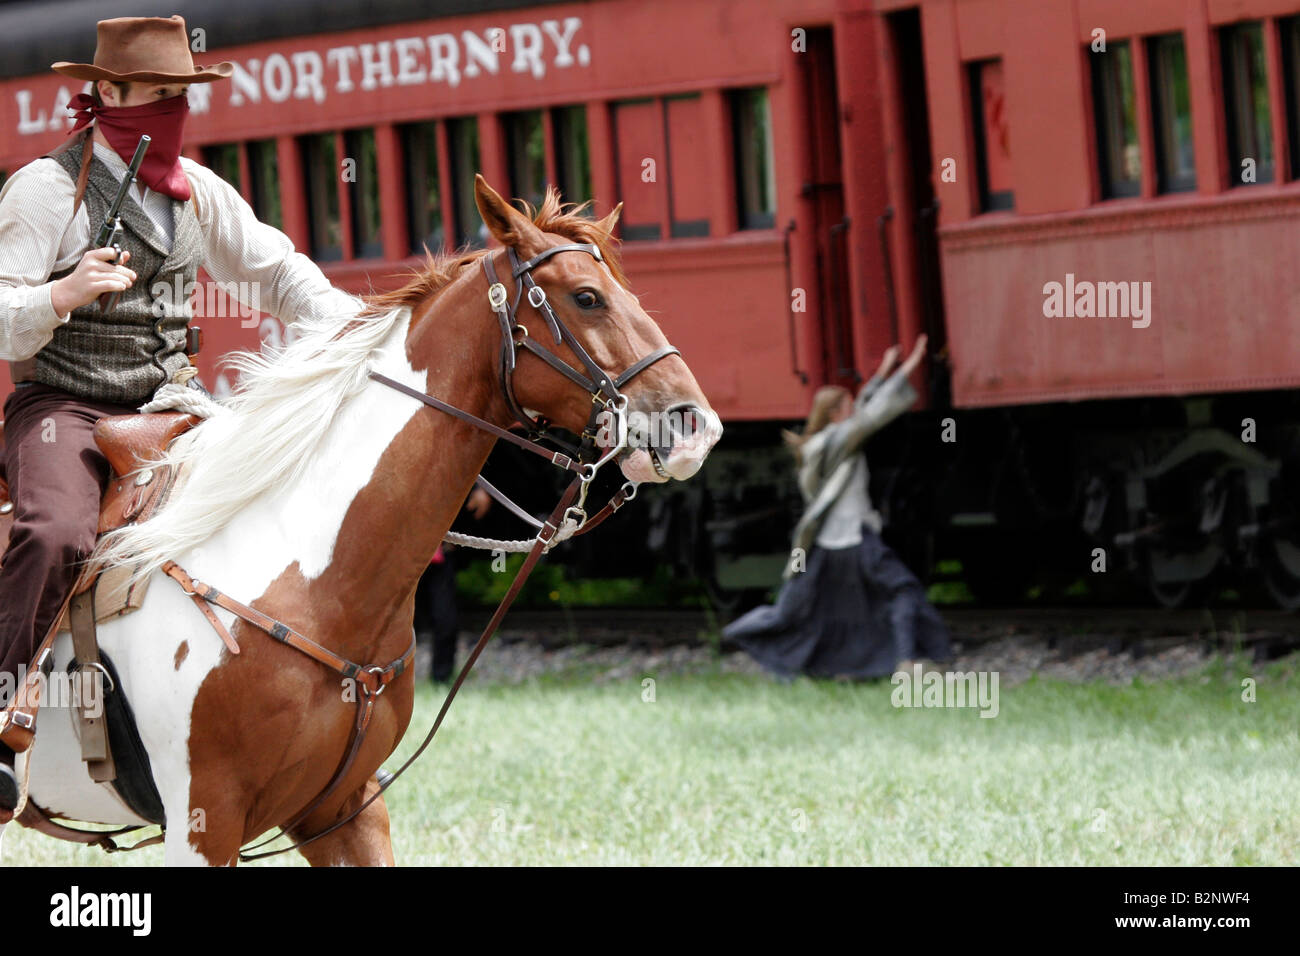 A cowboy bandit robbing an old steam train with a civilian girl trying to escape Stock Photo